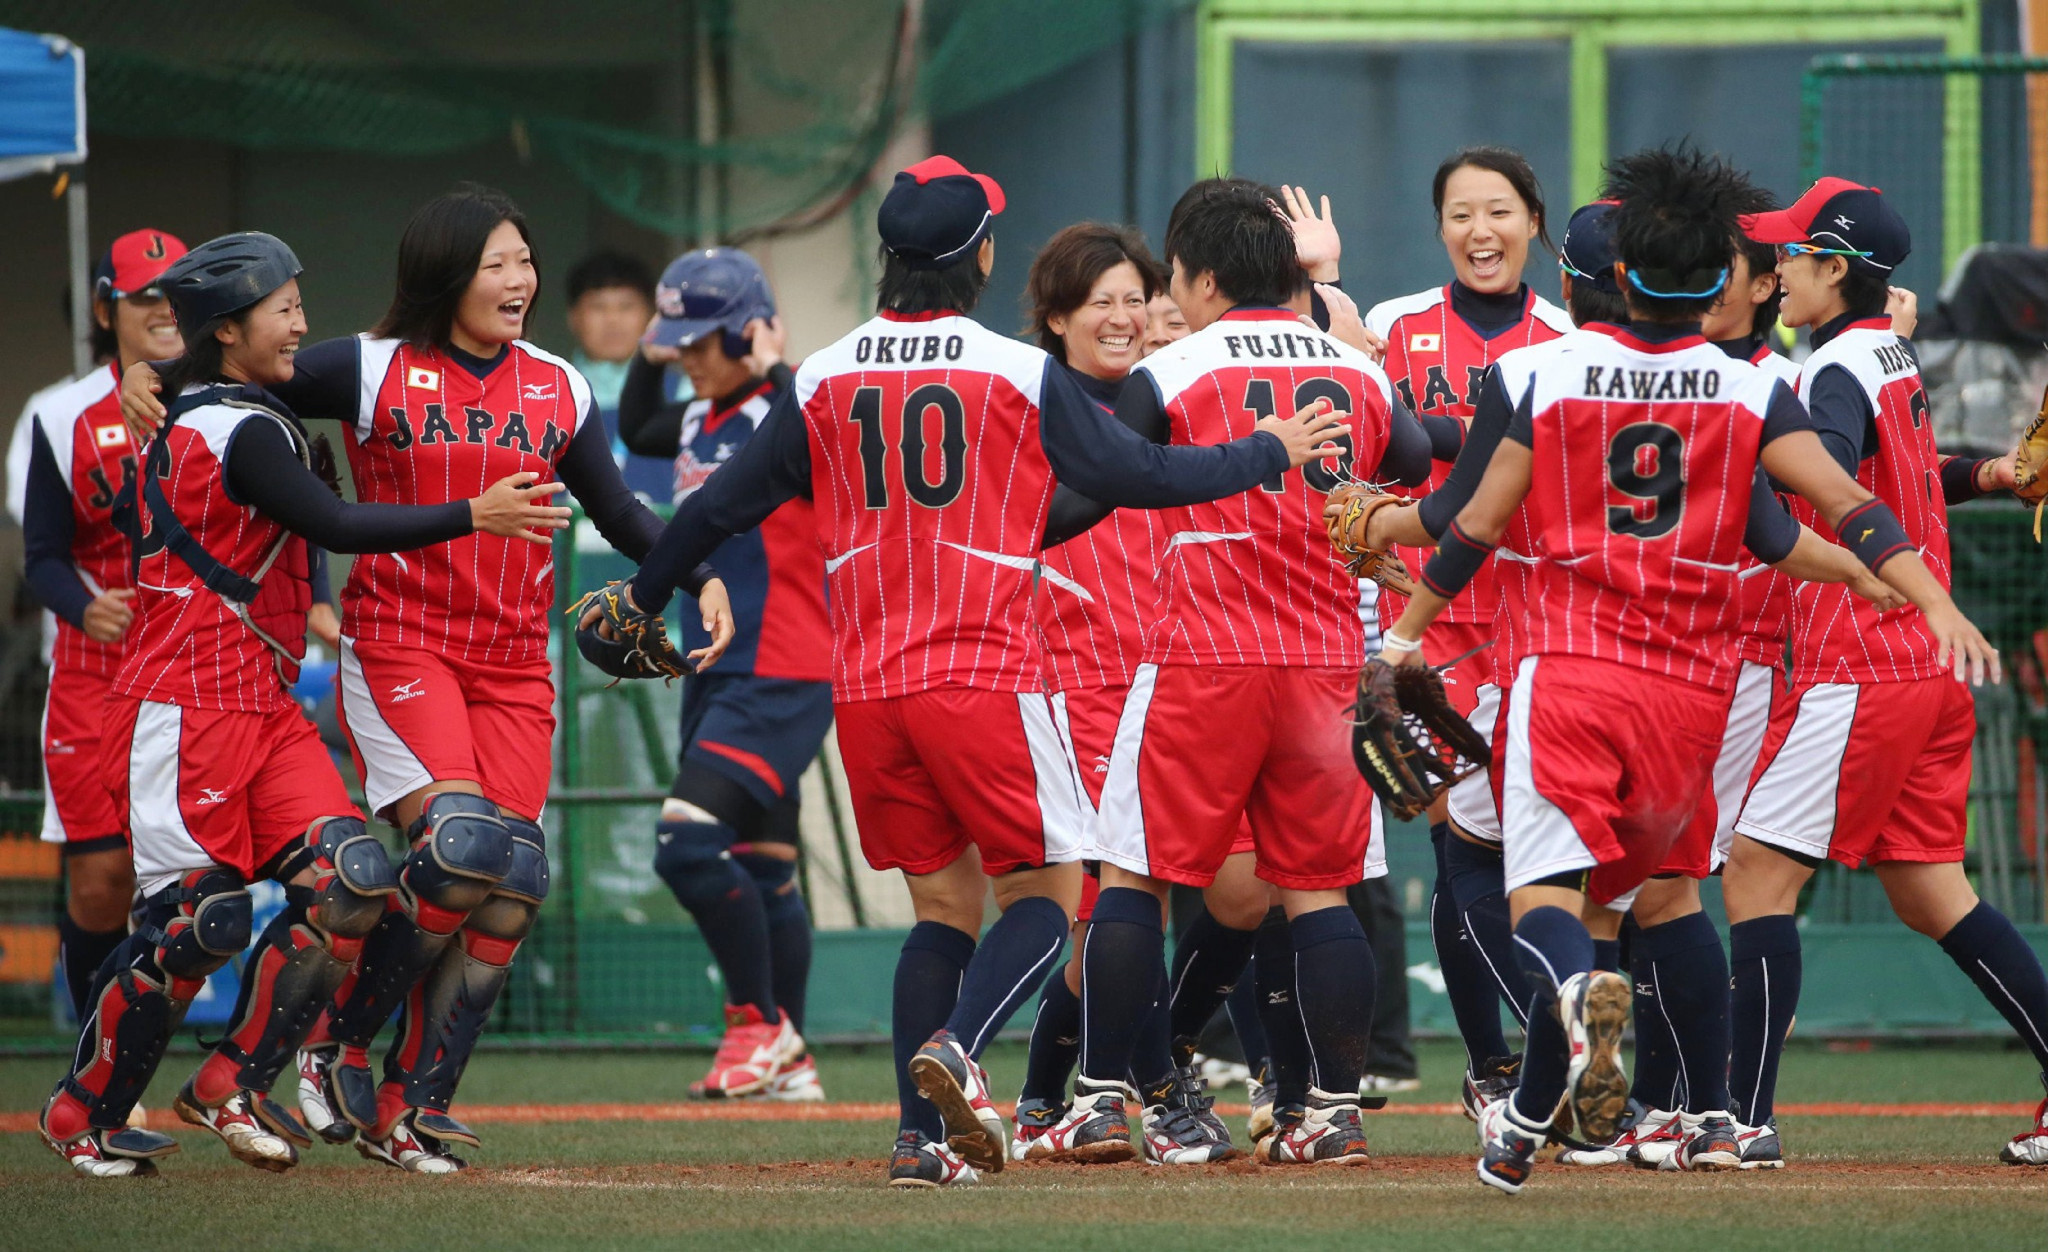 Japan won back-to-back Women's Softball World Championships in 2012 and 2014 with Hiromi Tokuda as the national association's President ©Getty Images